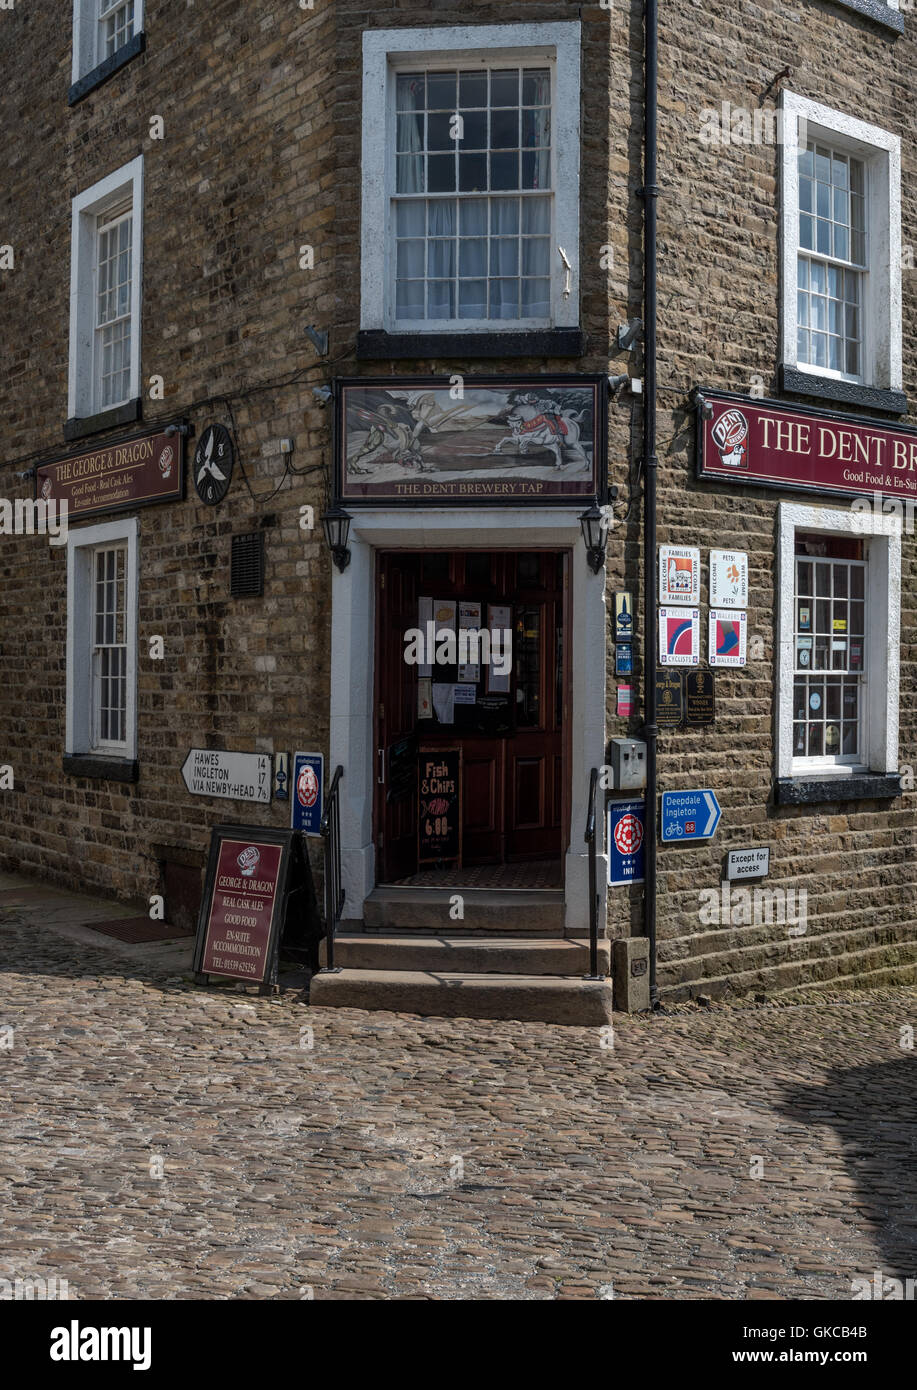 La Dent Brewery tocca a Dent in Yorkshire Dales Foto Stock